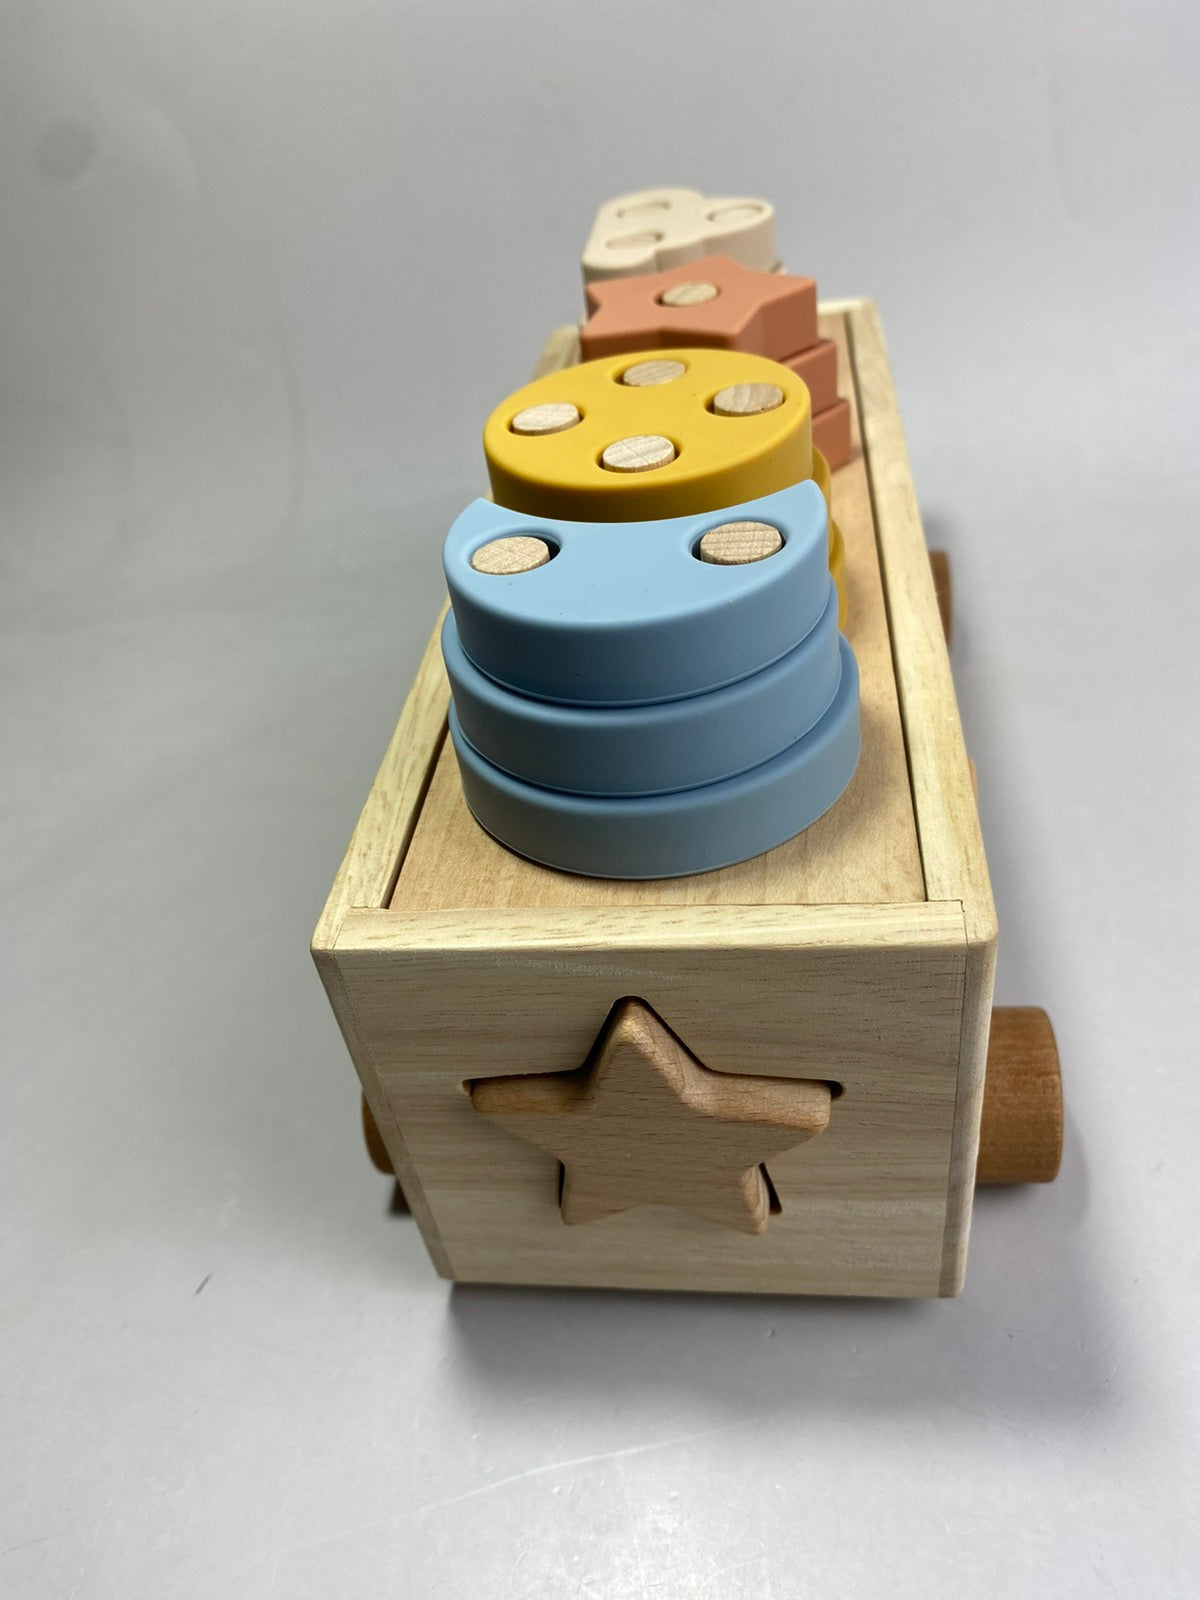 Silicone Animal and Celestial Shape Sorter with Wooden Base